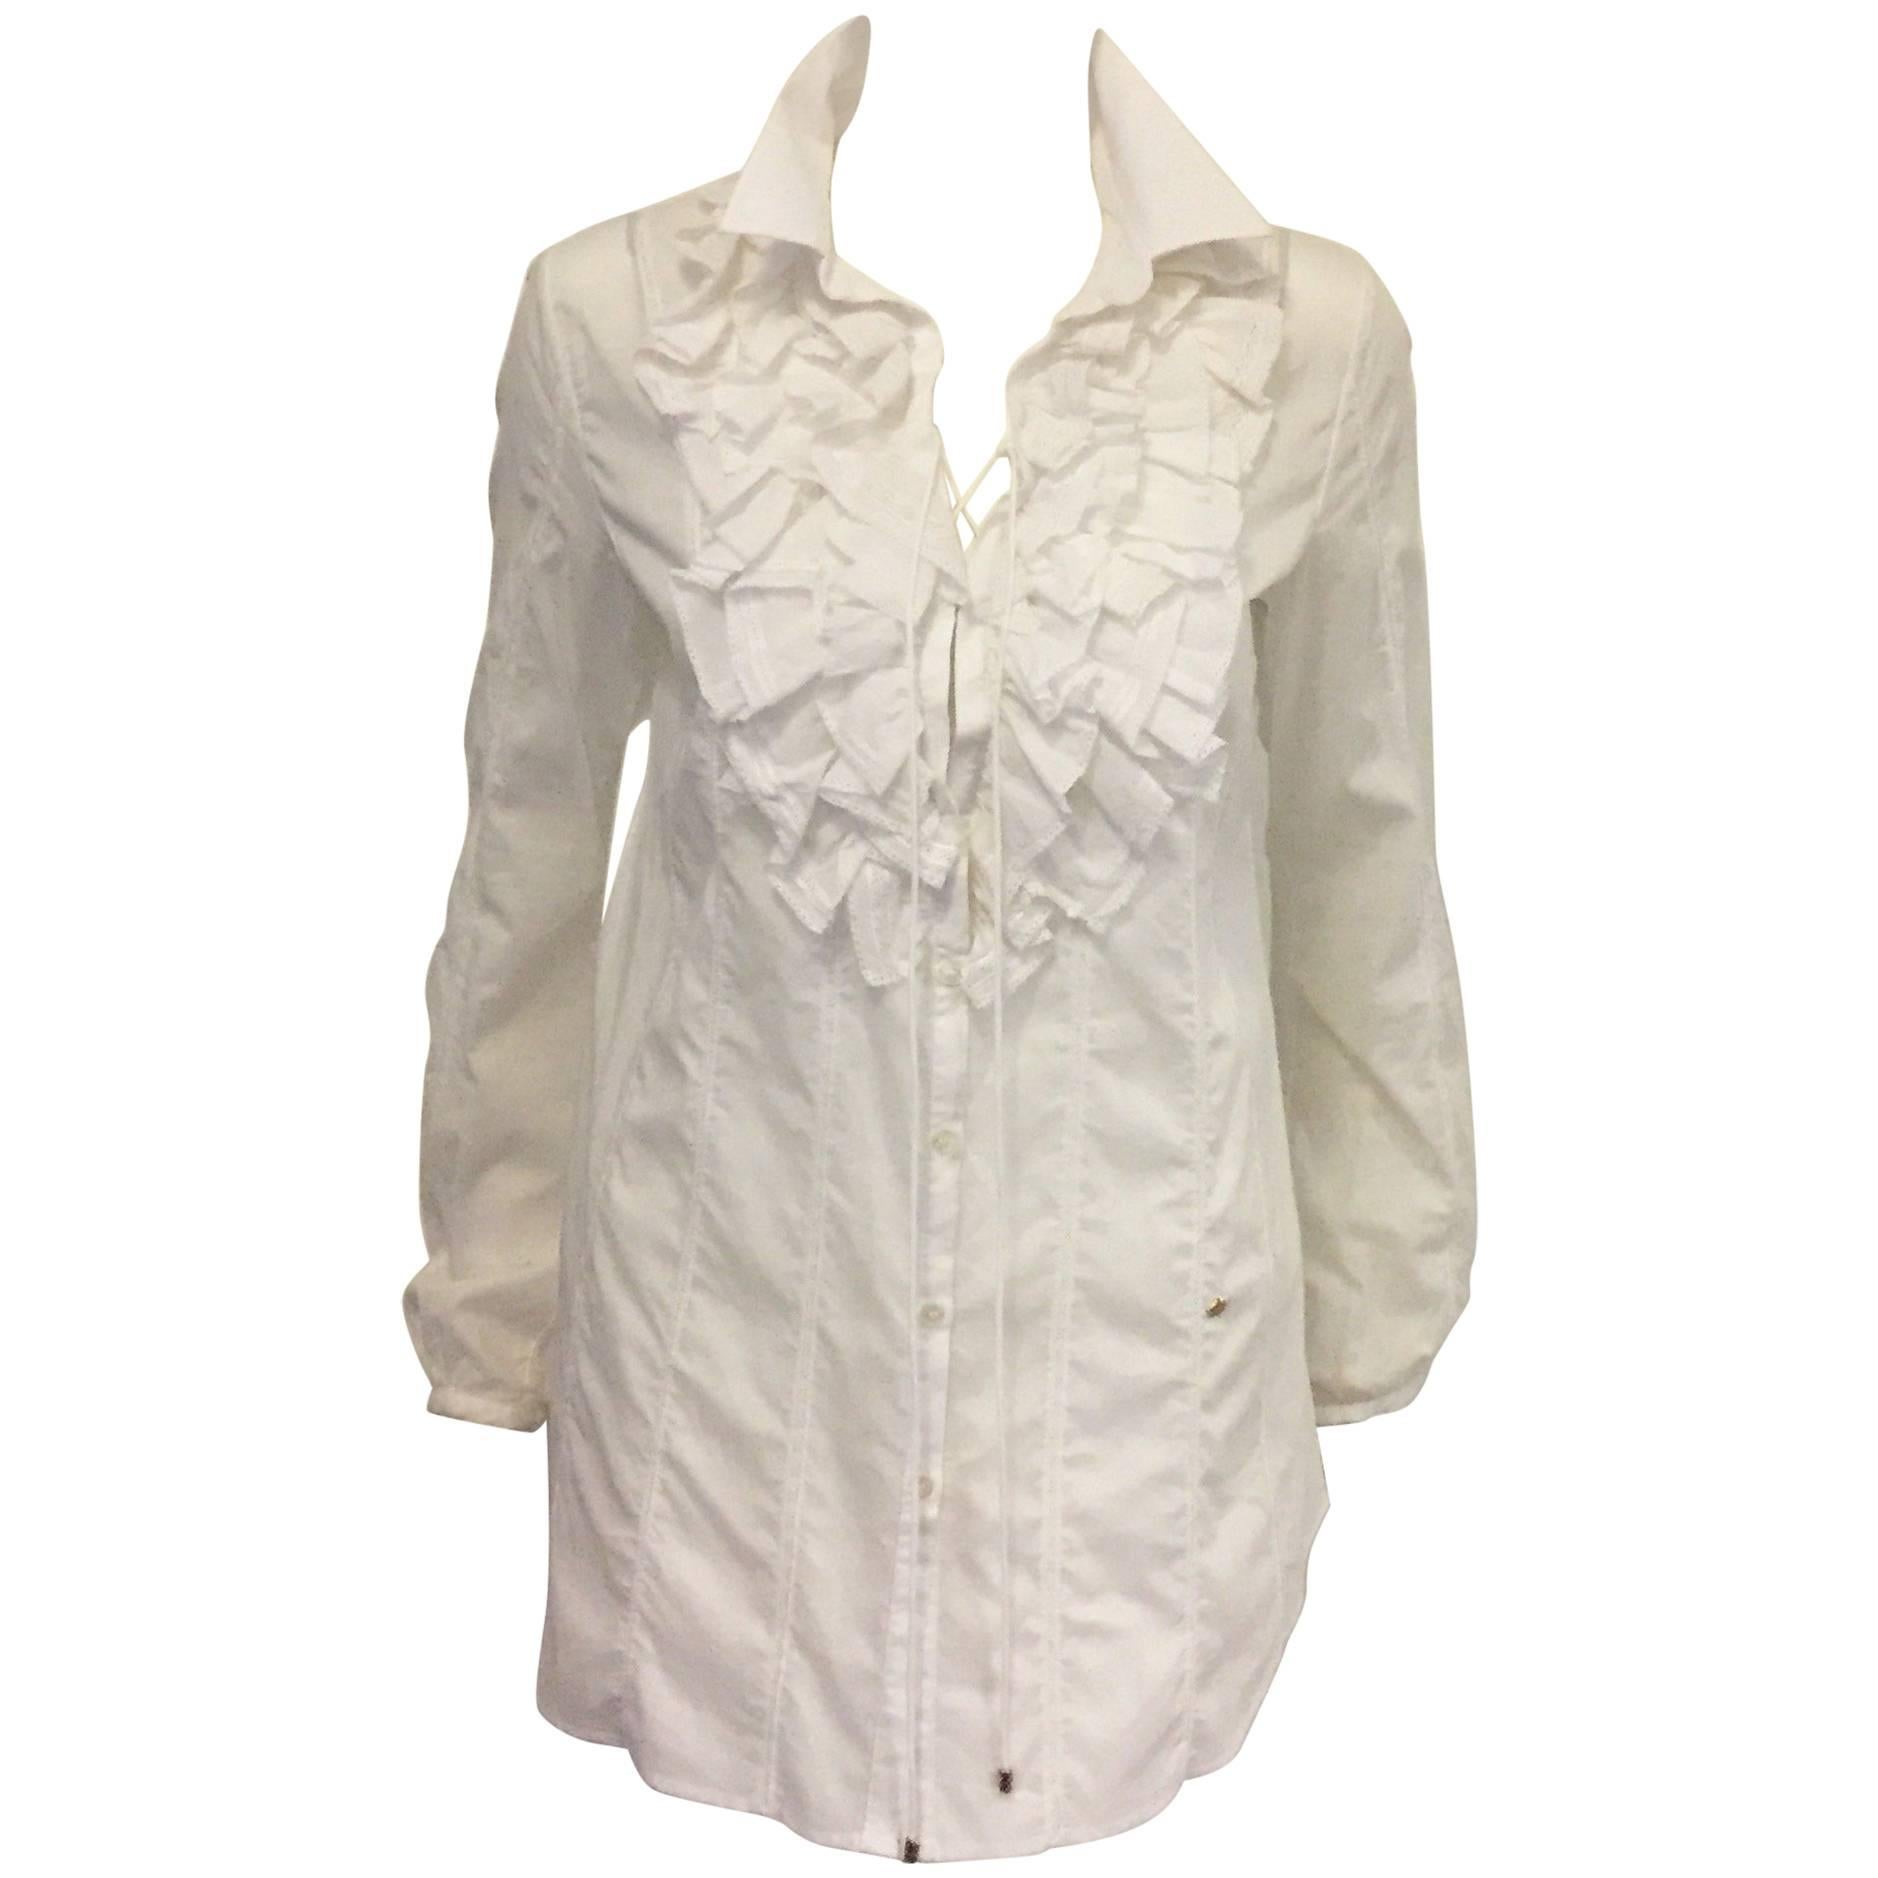 Romantic Roberto Cavalli's Frilly Blouse in Pure White with Ruffles and Lace  